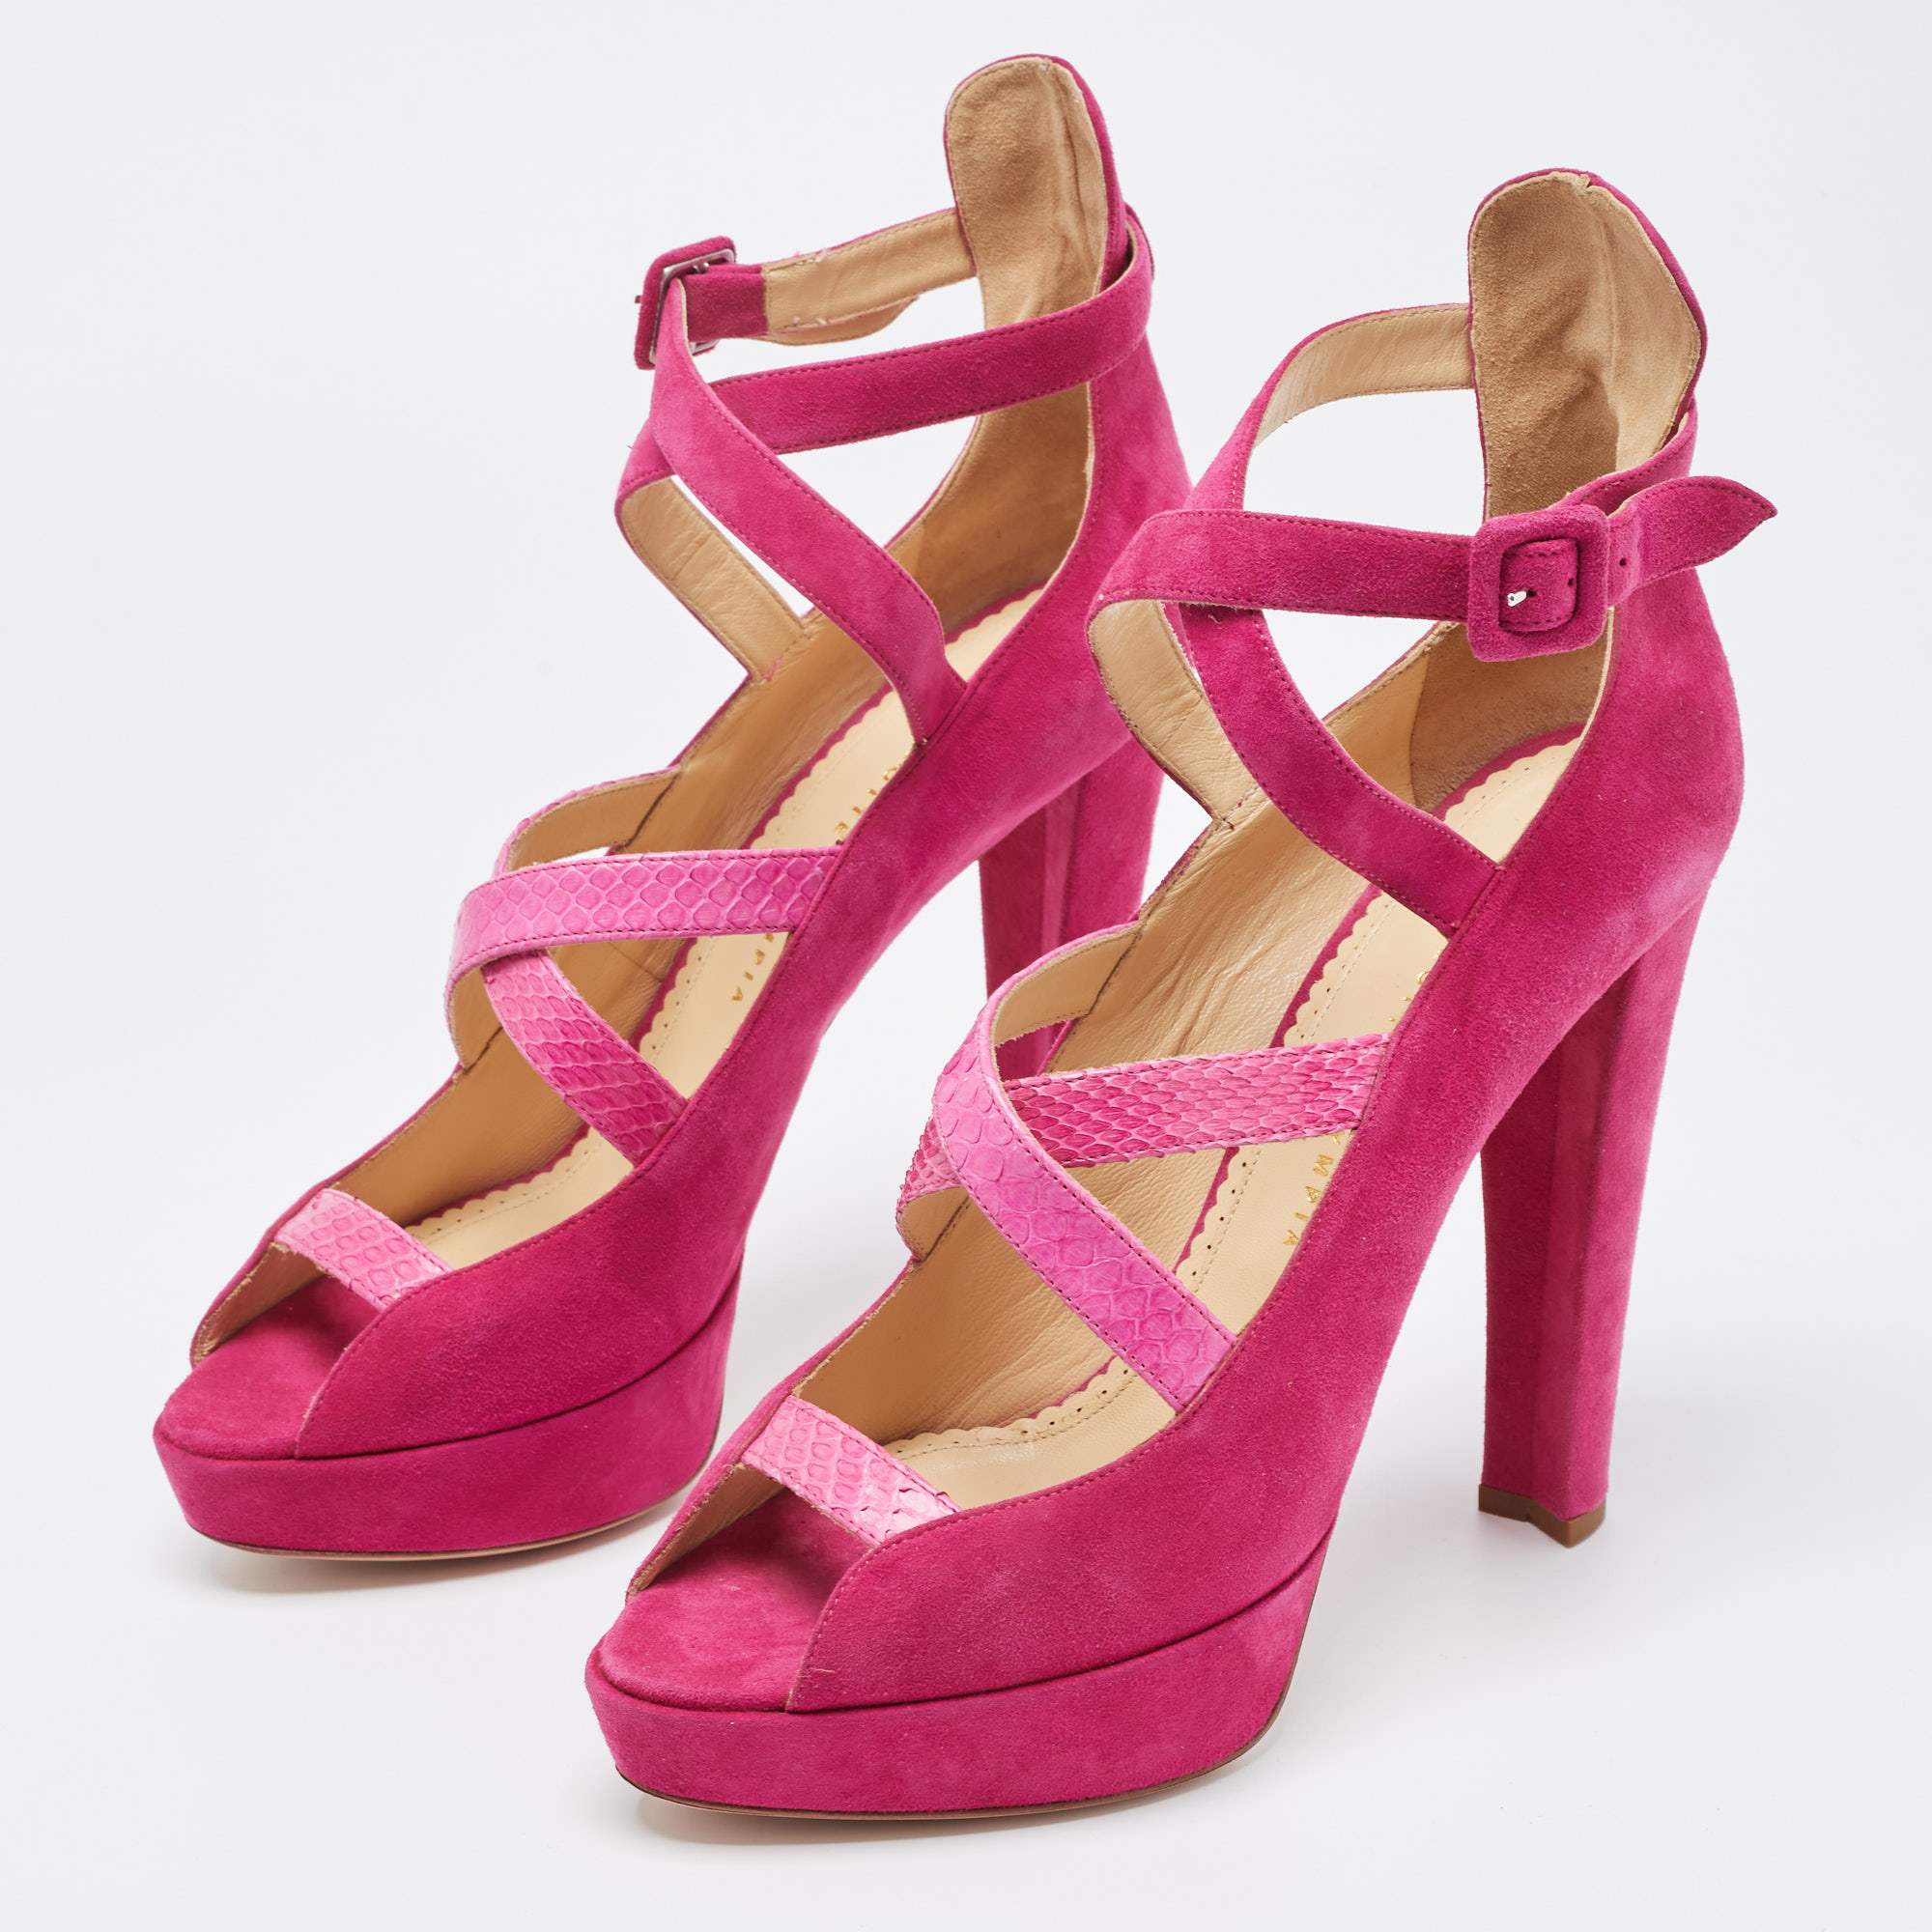 

Charlotte Olympia Pink Suede and Python Platform Ankle Strap Pumps Size